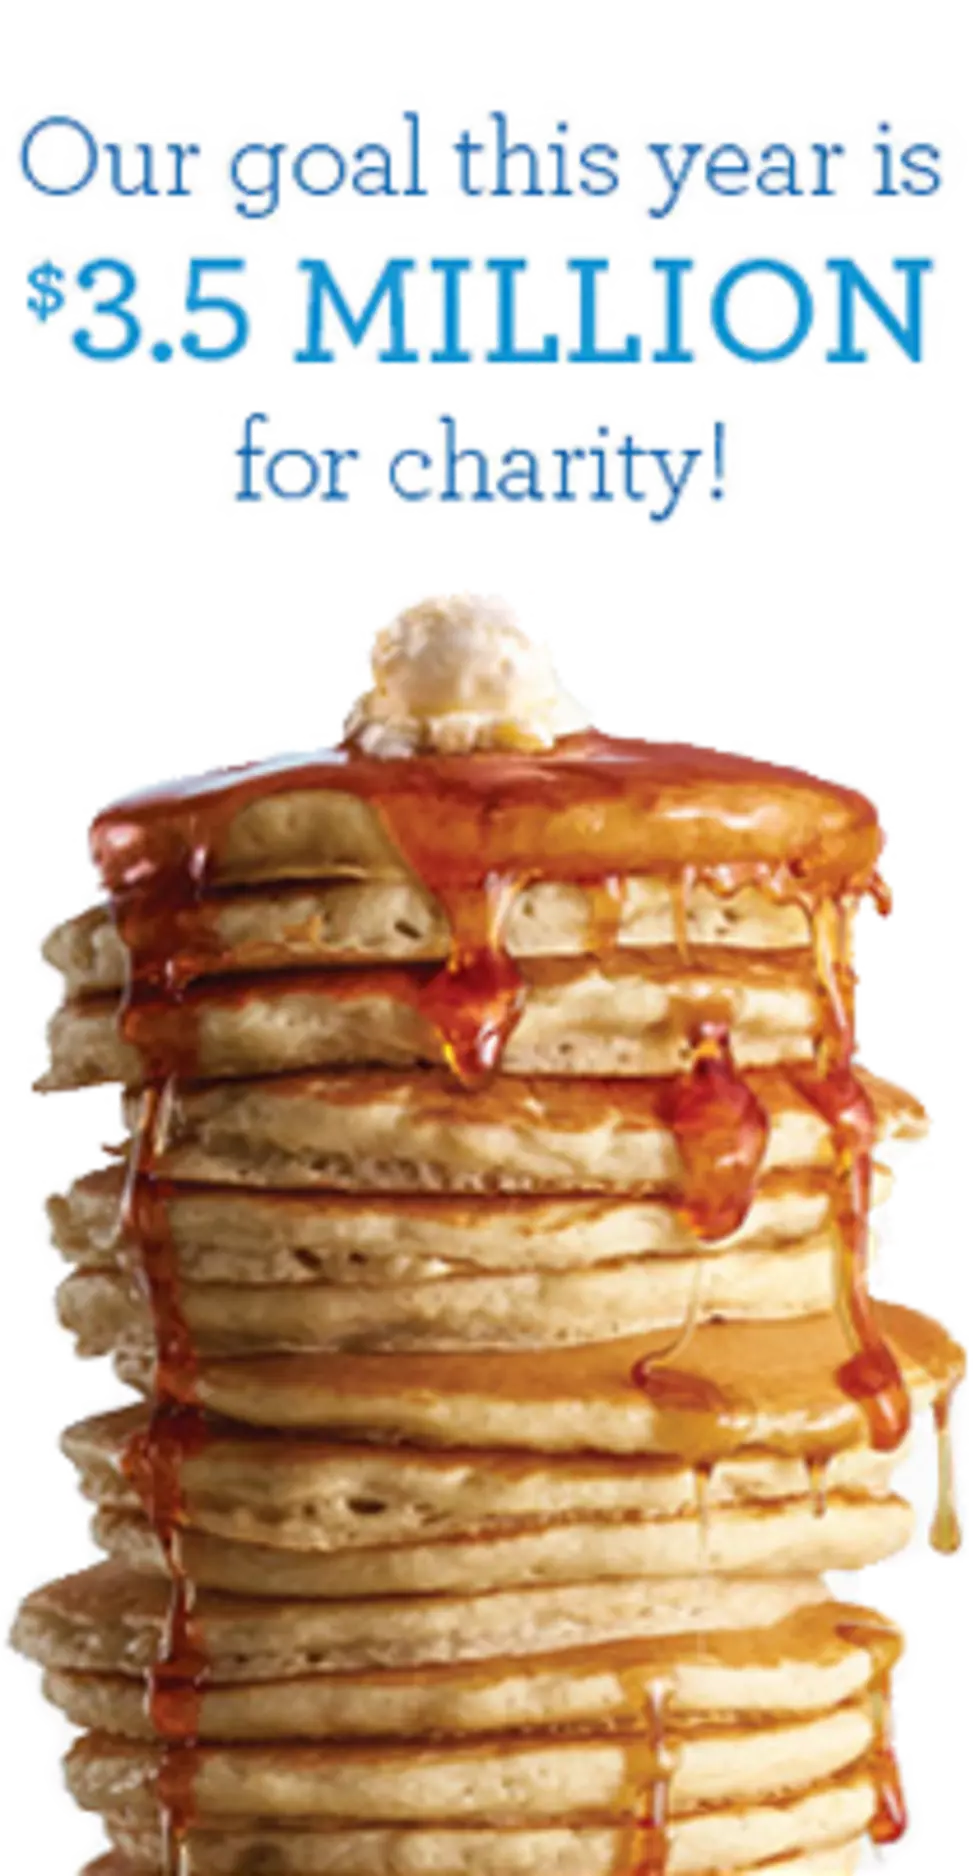 Get Free Pancakes On Tuesday, March 7